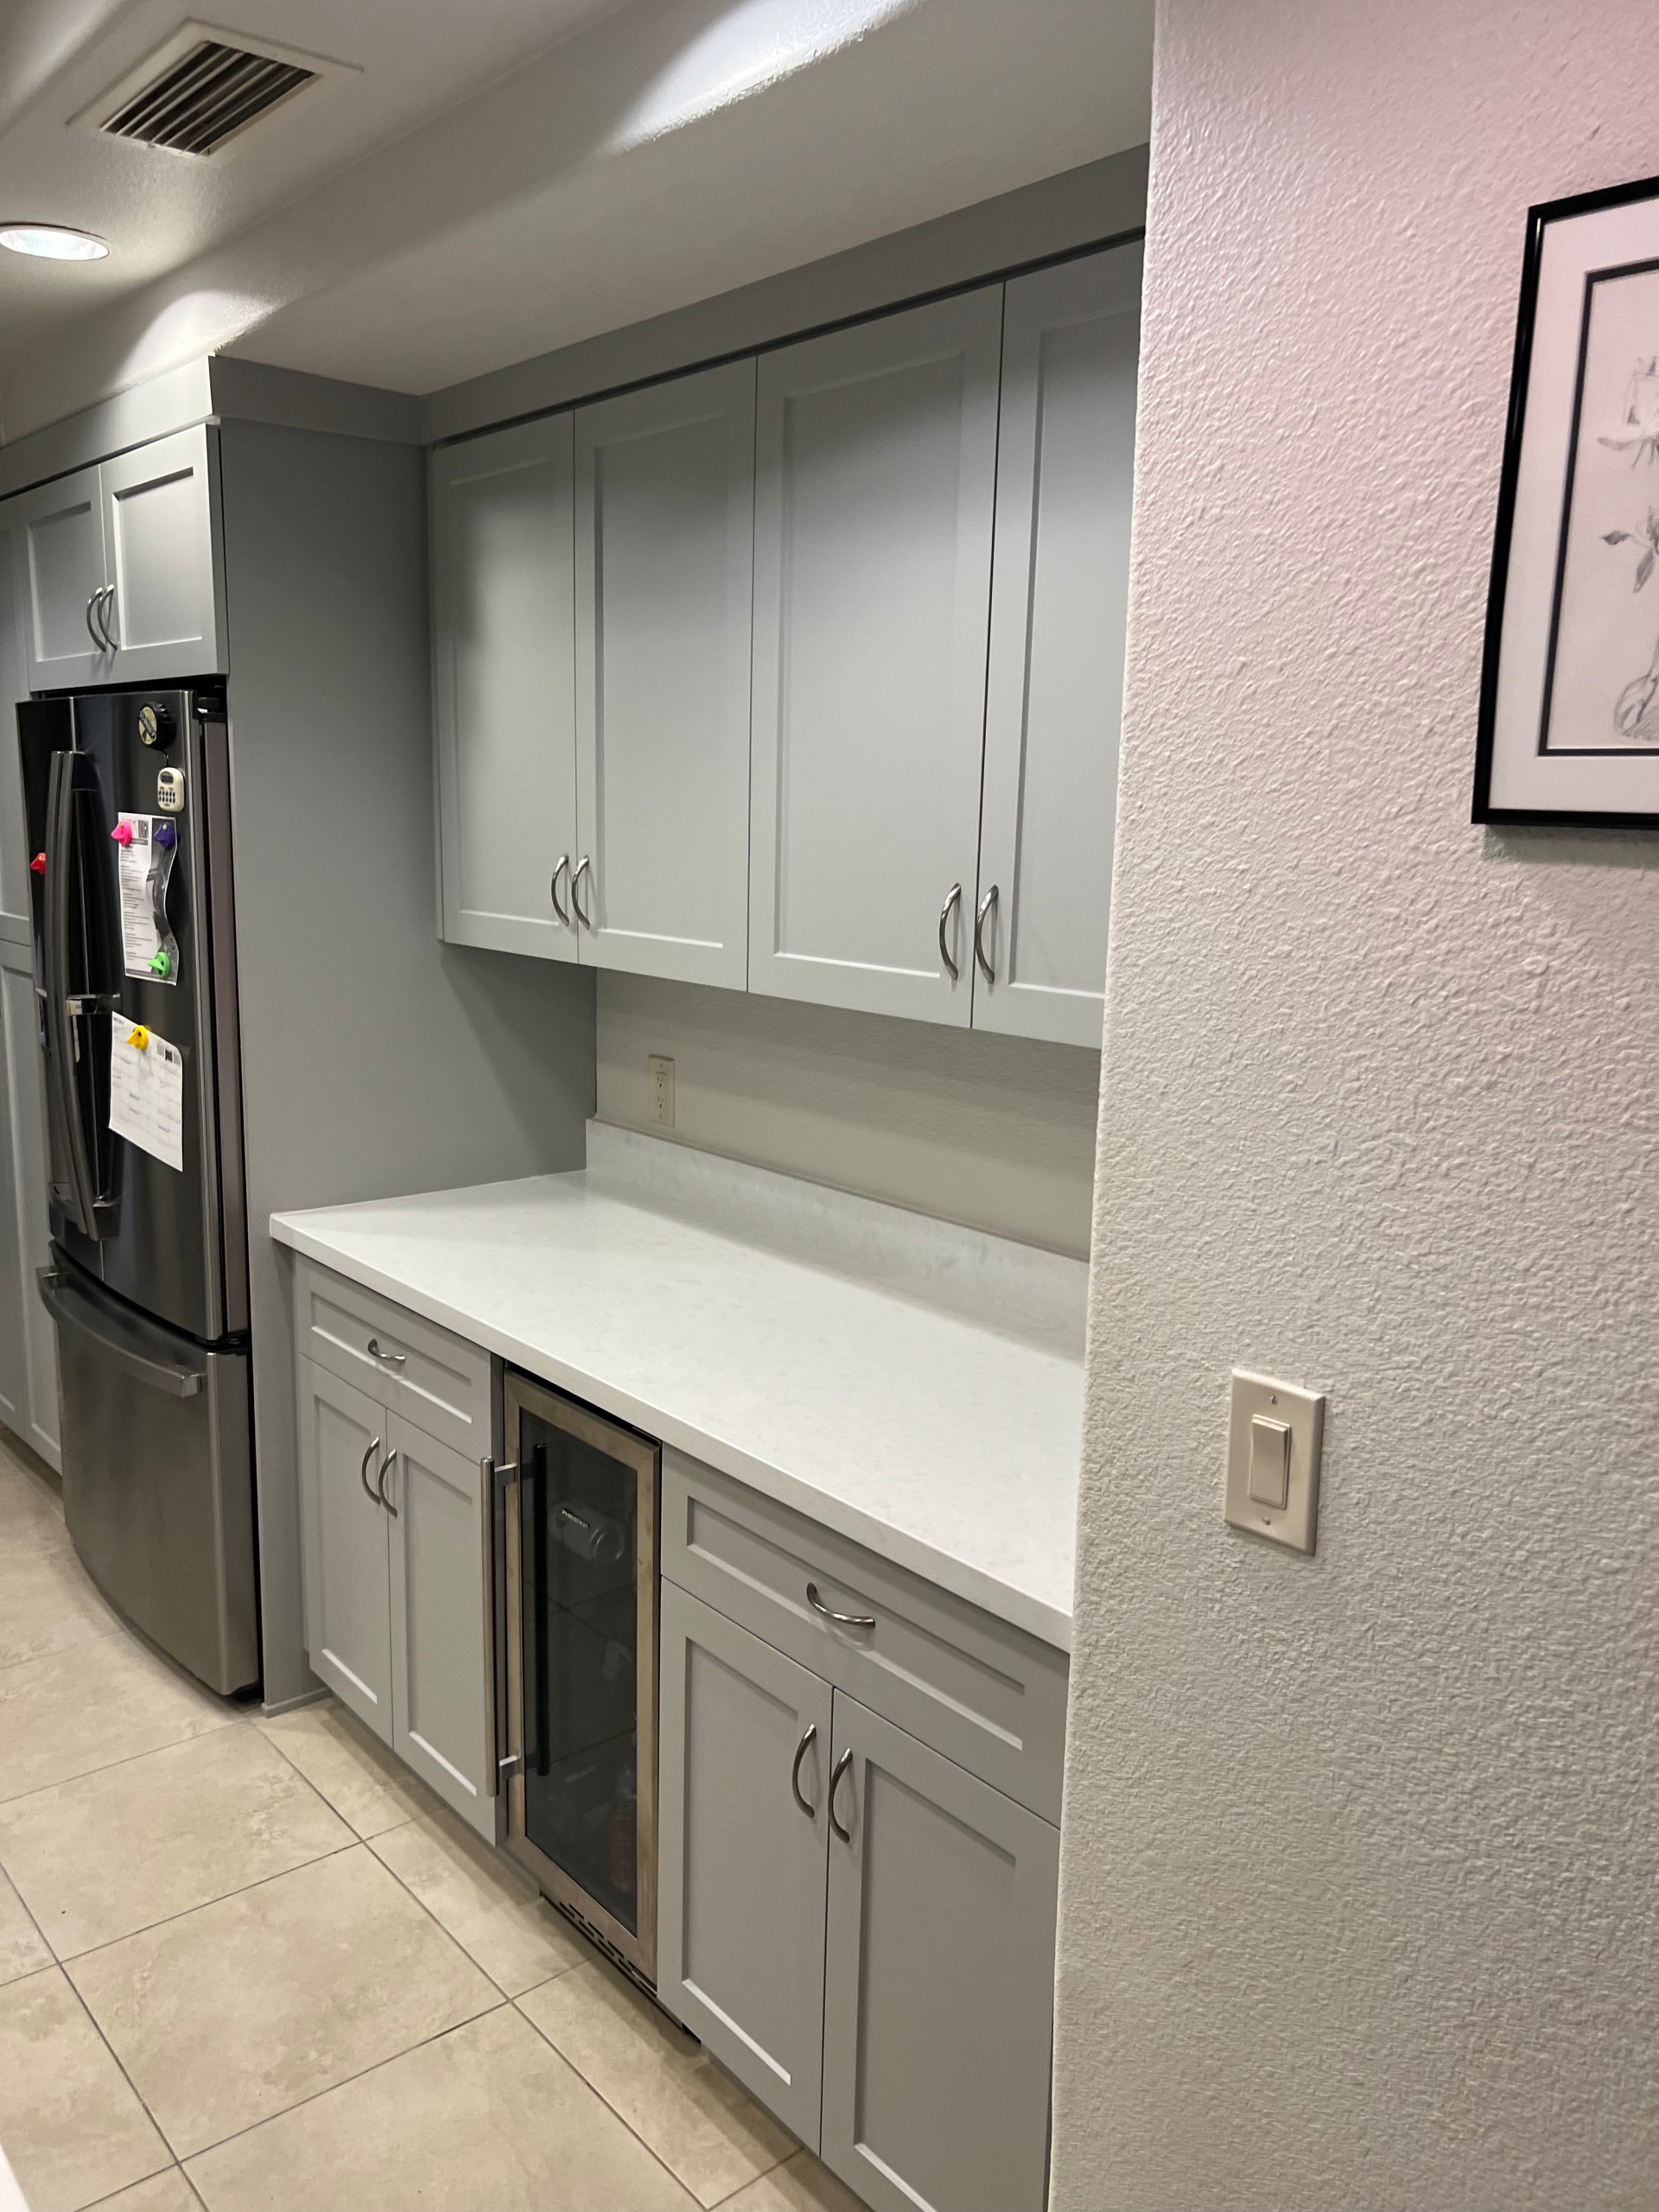 Scottsdale Kitchen Cabinetry Build and Paint